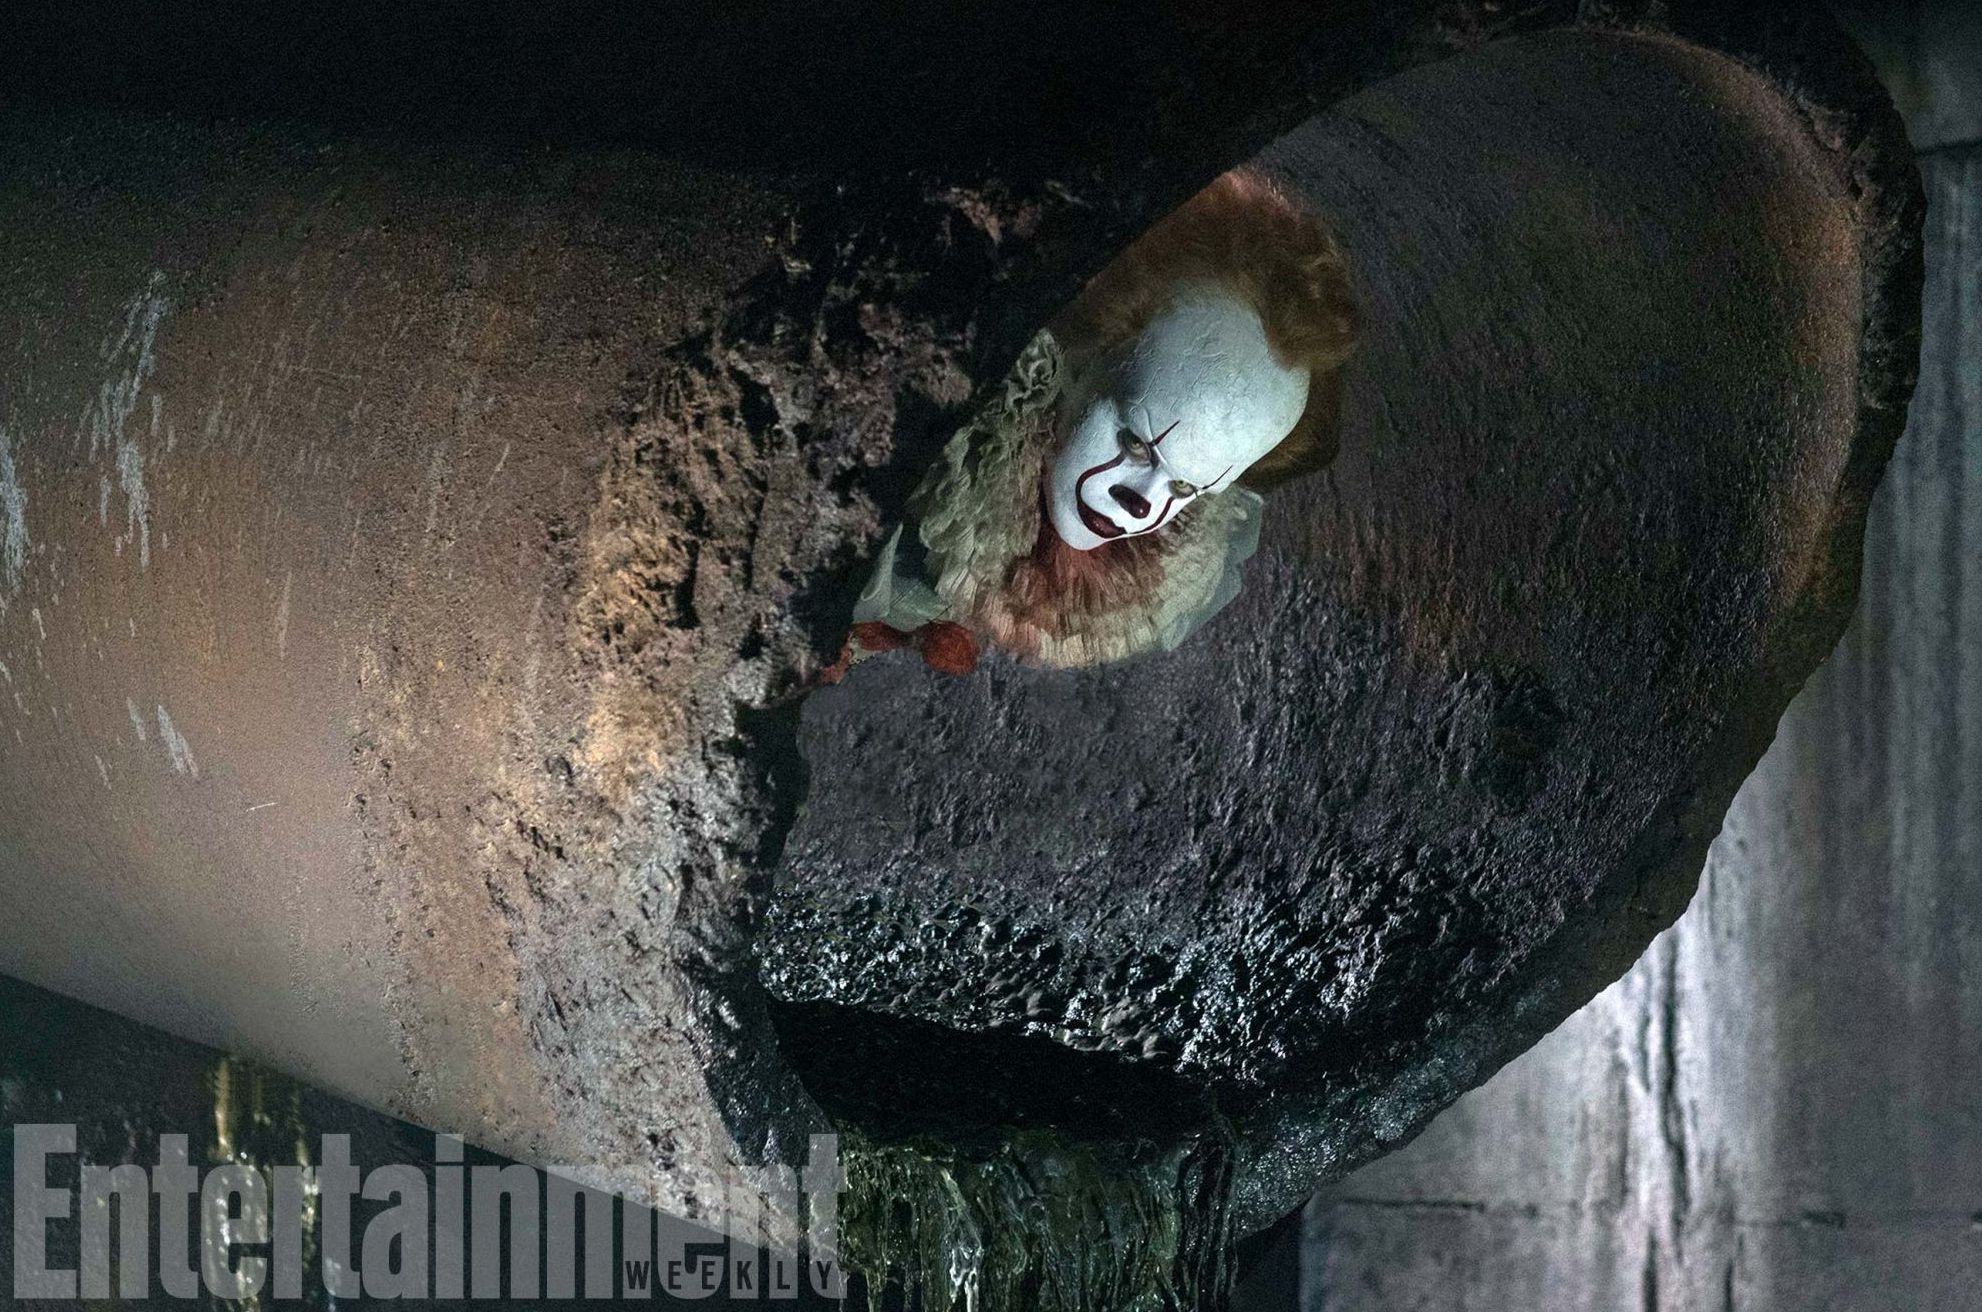 New image from It